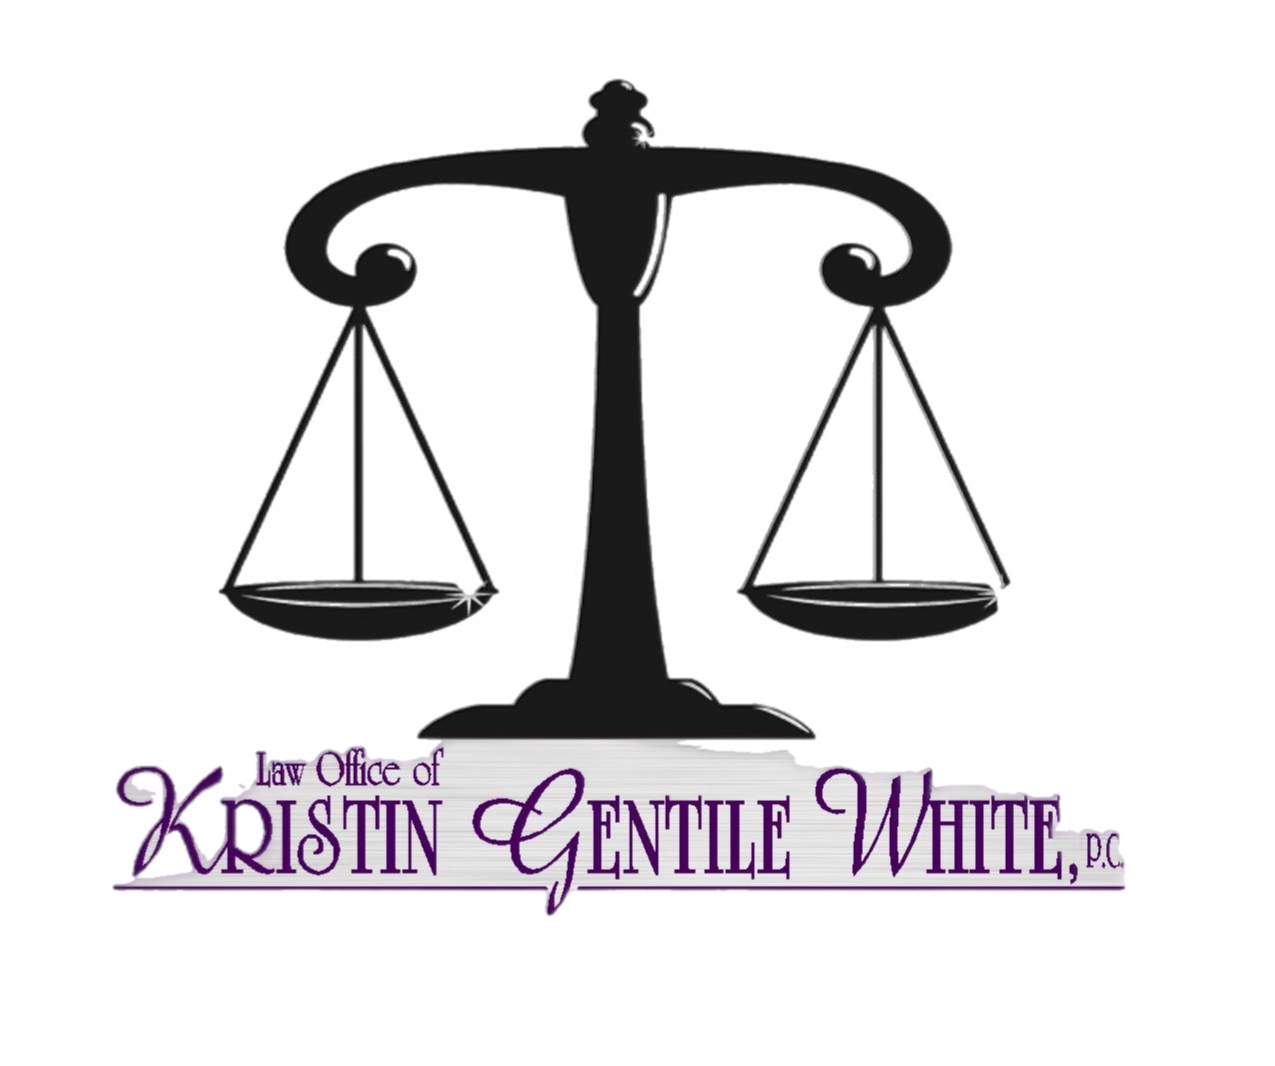 Law Office of Kristin Gentile White, PC